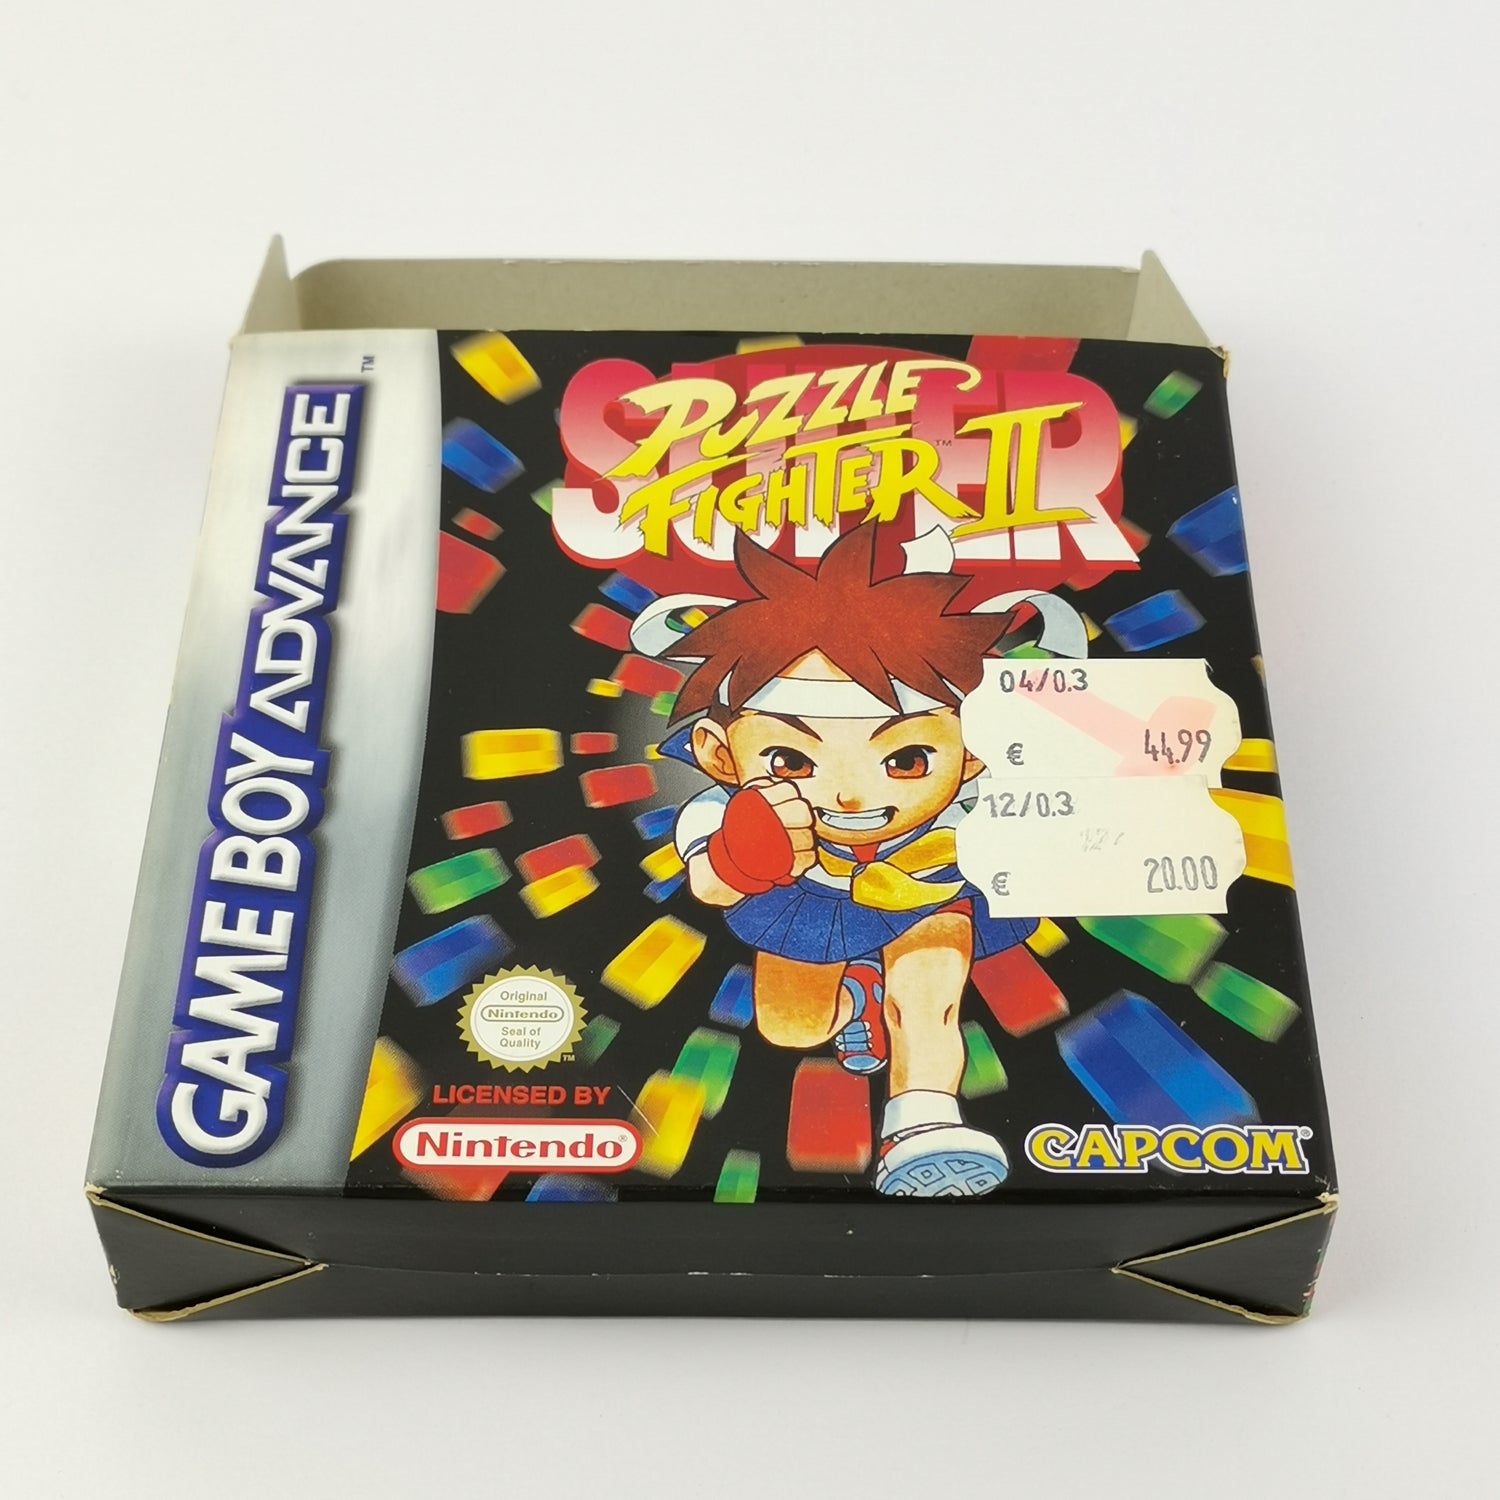 Nintendo Game Boy Advance Game: Super Puzzle Fighter II 2 - OVP Instructions GBA